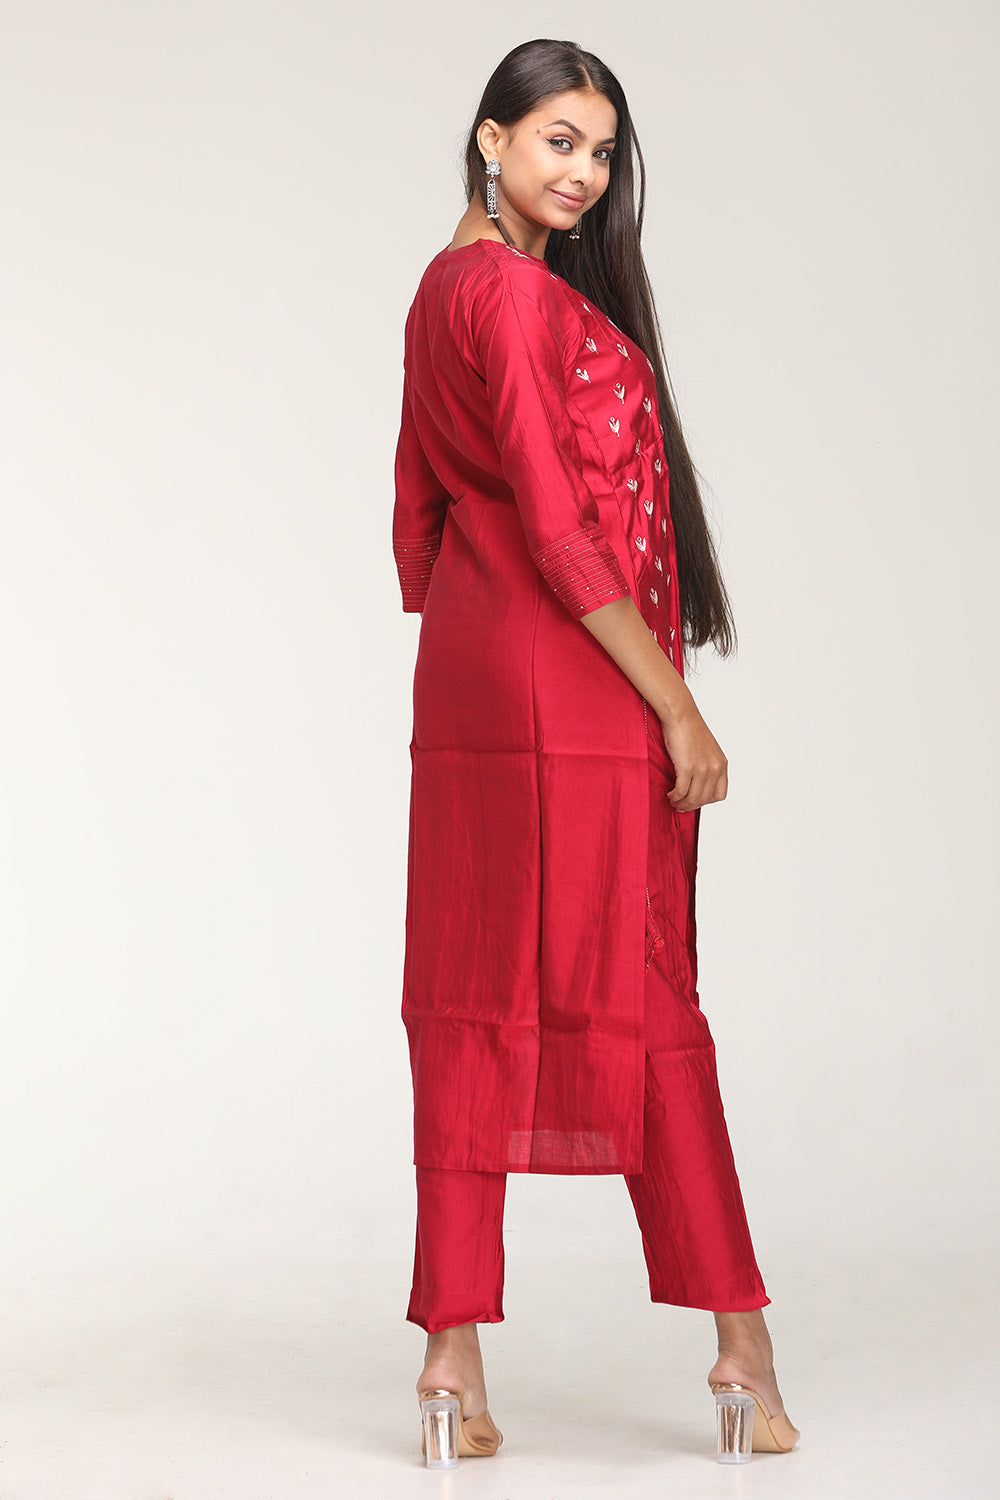 Straight Pant Suit - Buy Straight Pant Suit Online Starting at